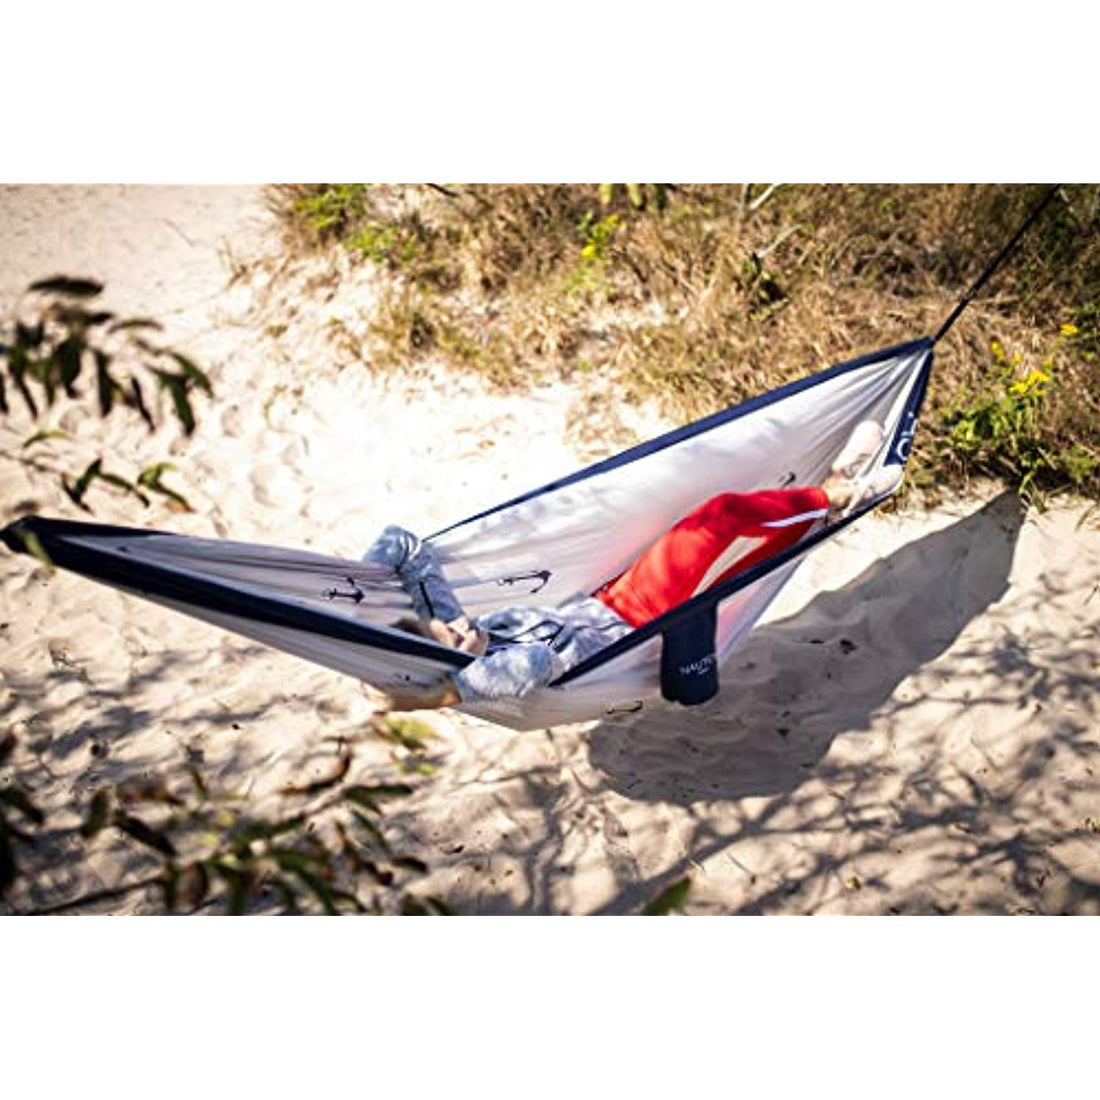 Nautica Portable Camping Hammock 1-2Person Kids or Adults with Straps, Caribiners & Bag for Travel/Backpacking/Hiking/Backyard/Lawn, Maritime Blue/High Rise Grey, Small